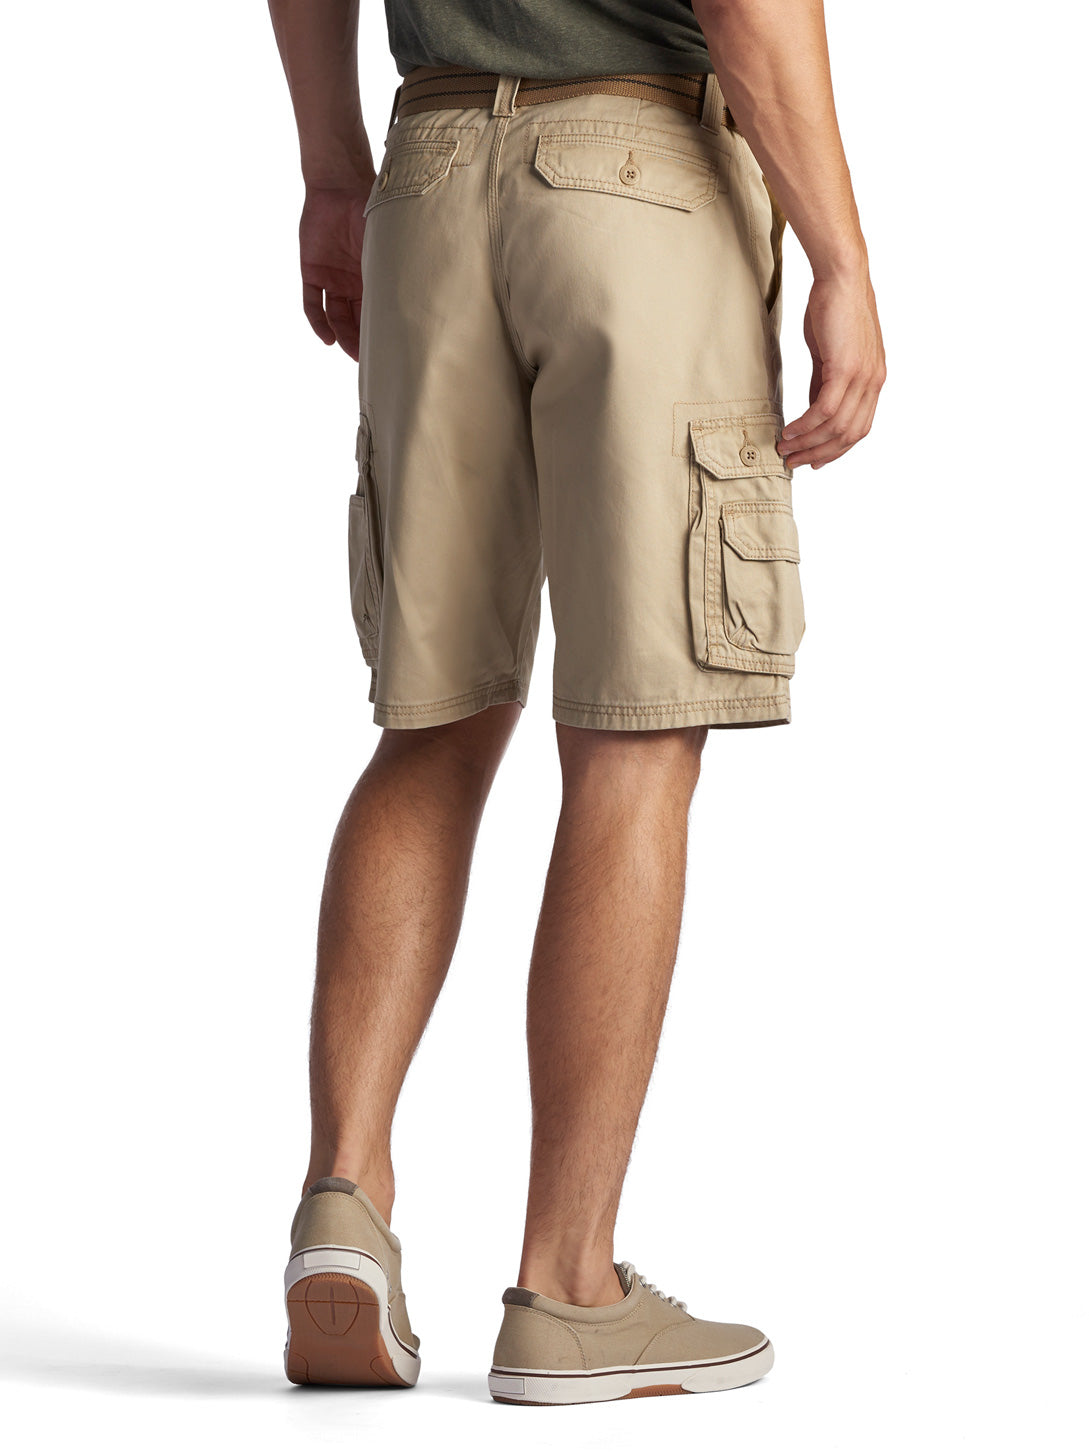 Men's Dungarees Belted Wyoming Cargo Short - Buff